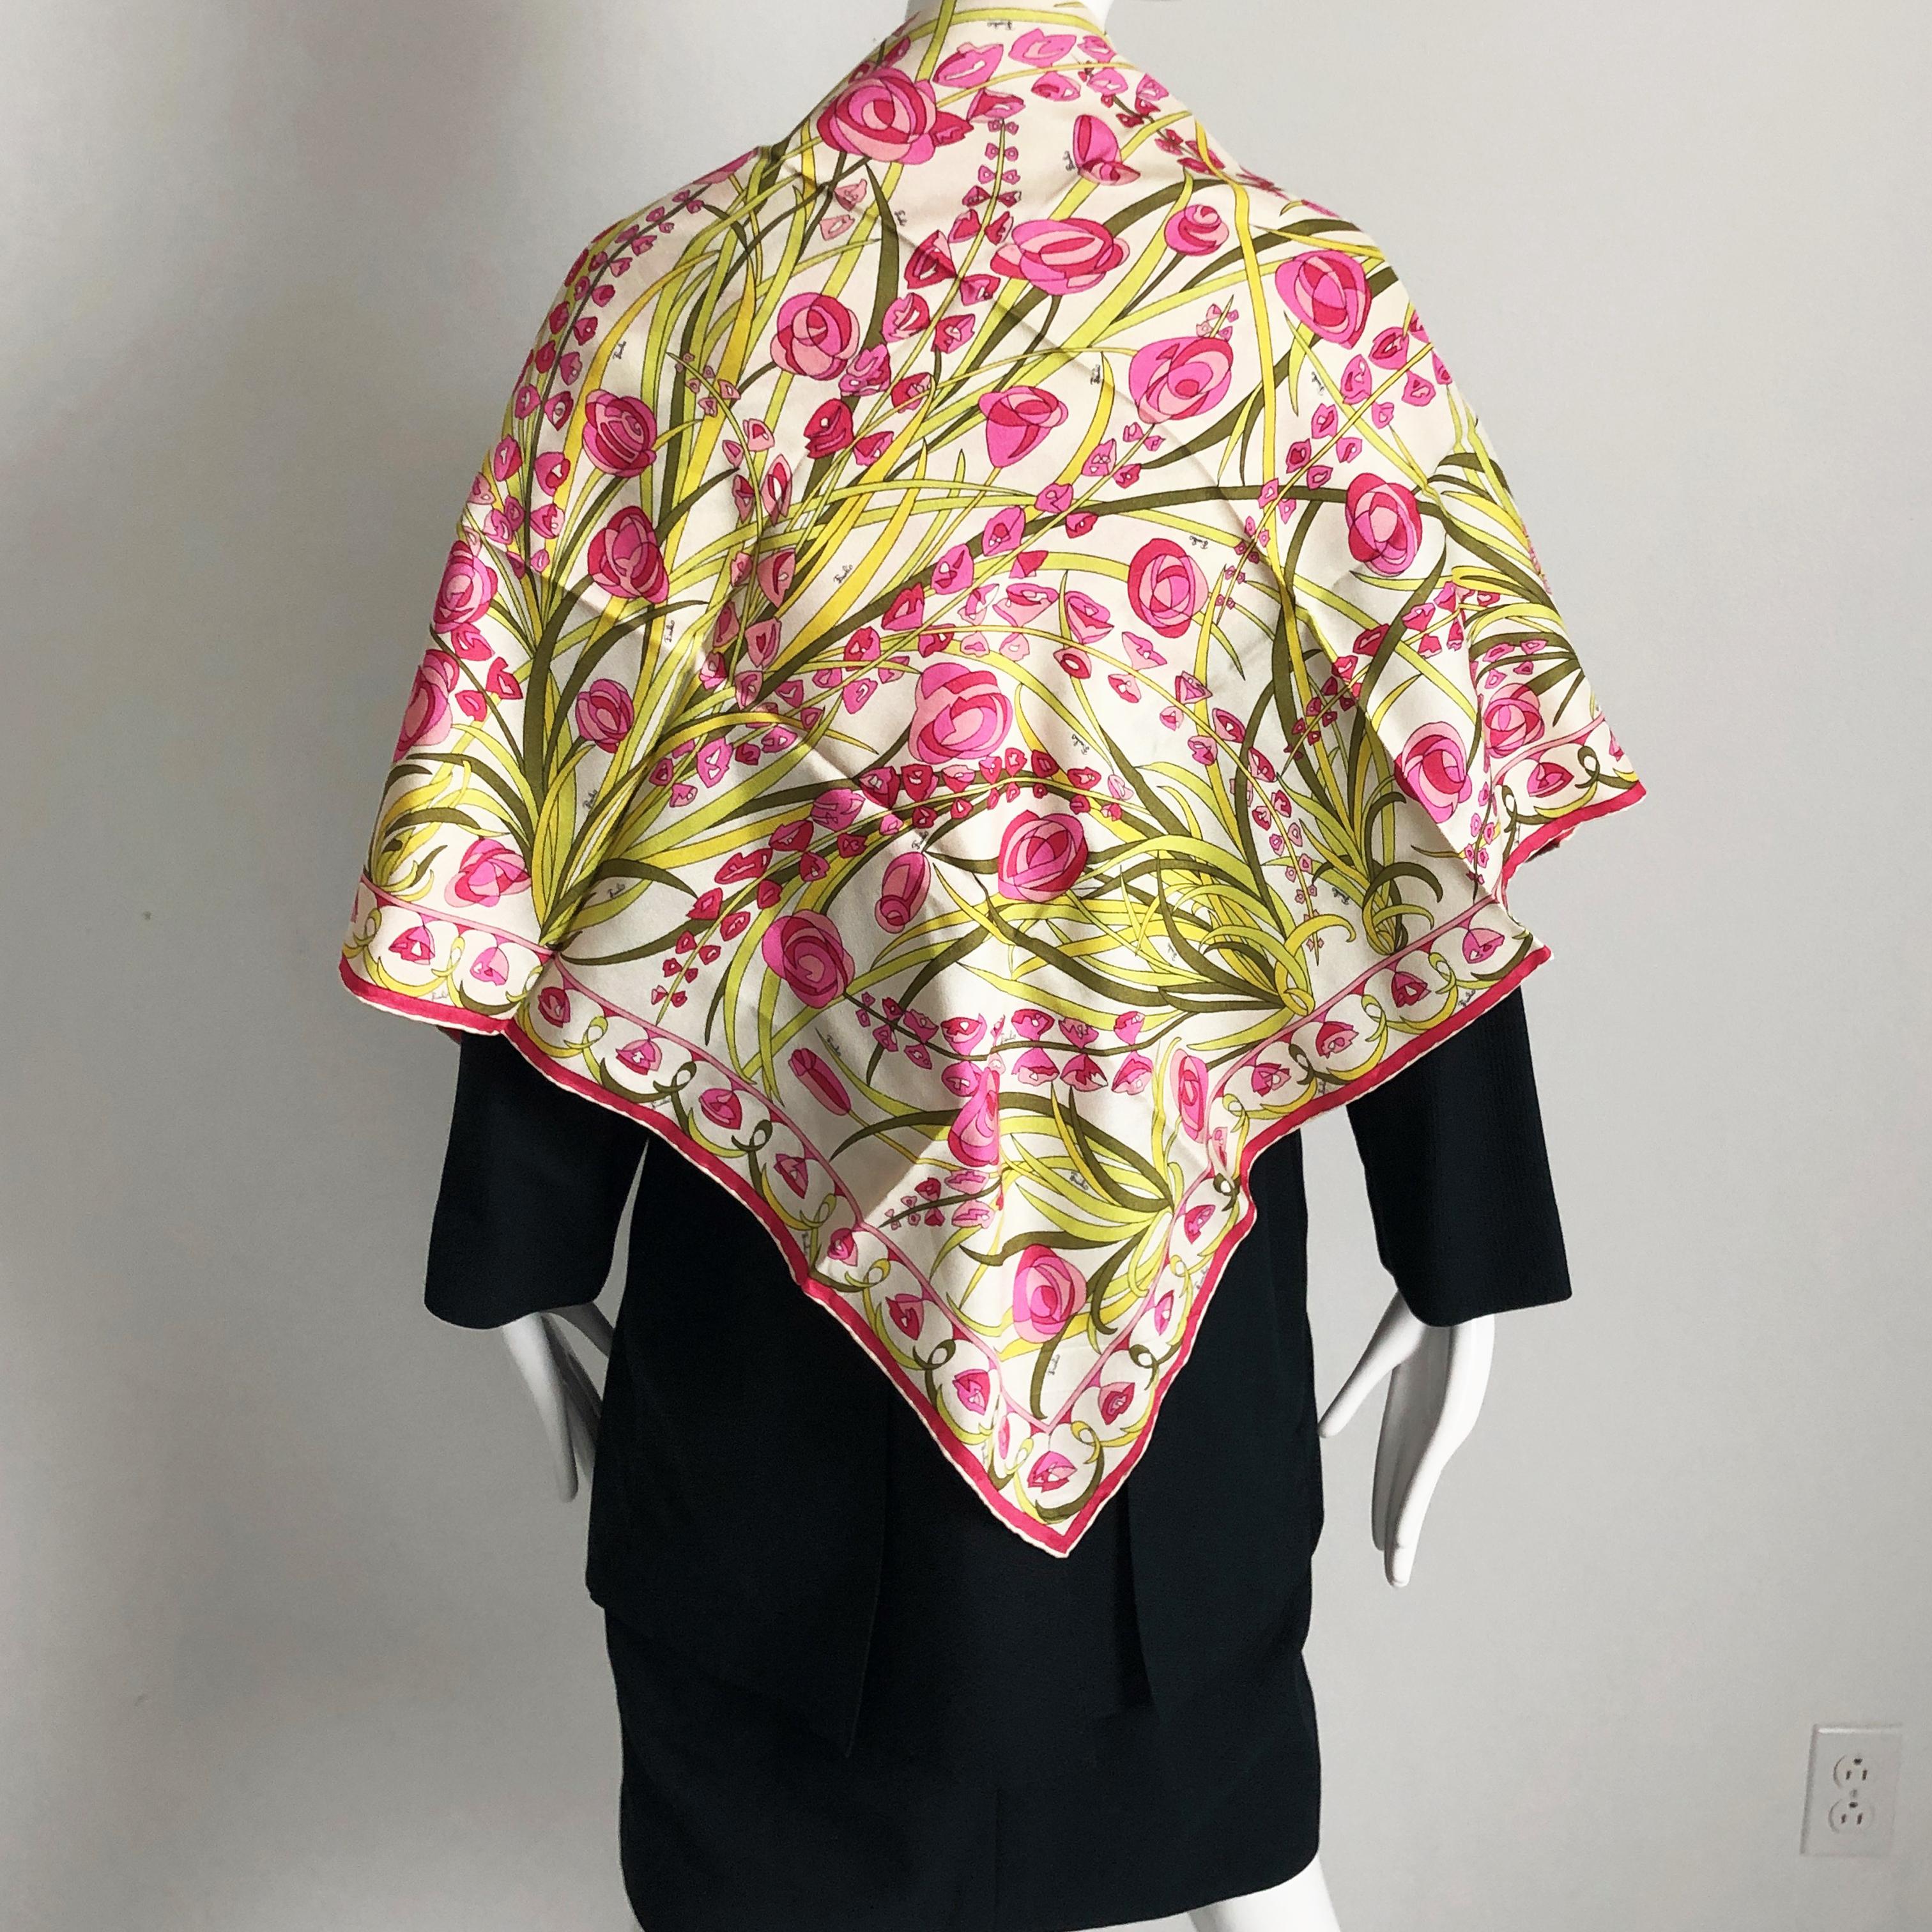 Authentic, preowned, vintage Emilio Pucci silk scarf or shawl, 34in. Measures appx 34in square/hand-rolled hems/dry clean only. 

Fabulous and colorful scarf that can be styled in so many ways!! Preowned/vintage with minimal signs of prior wear: